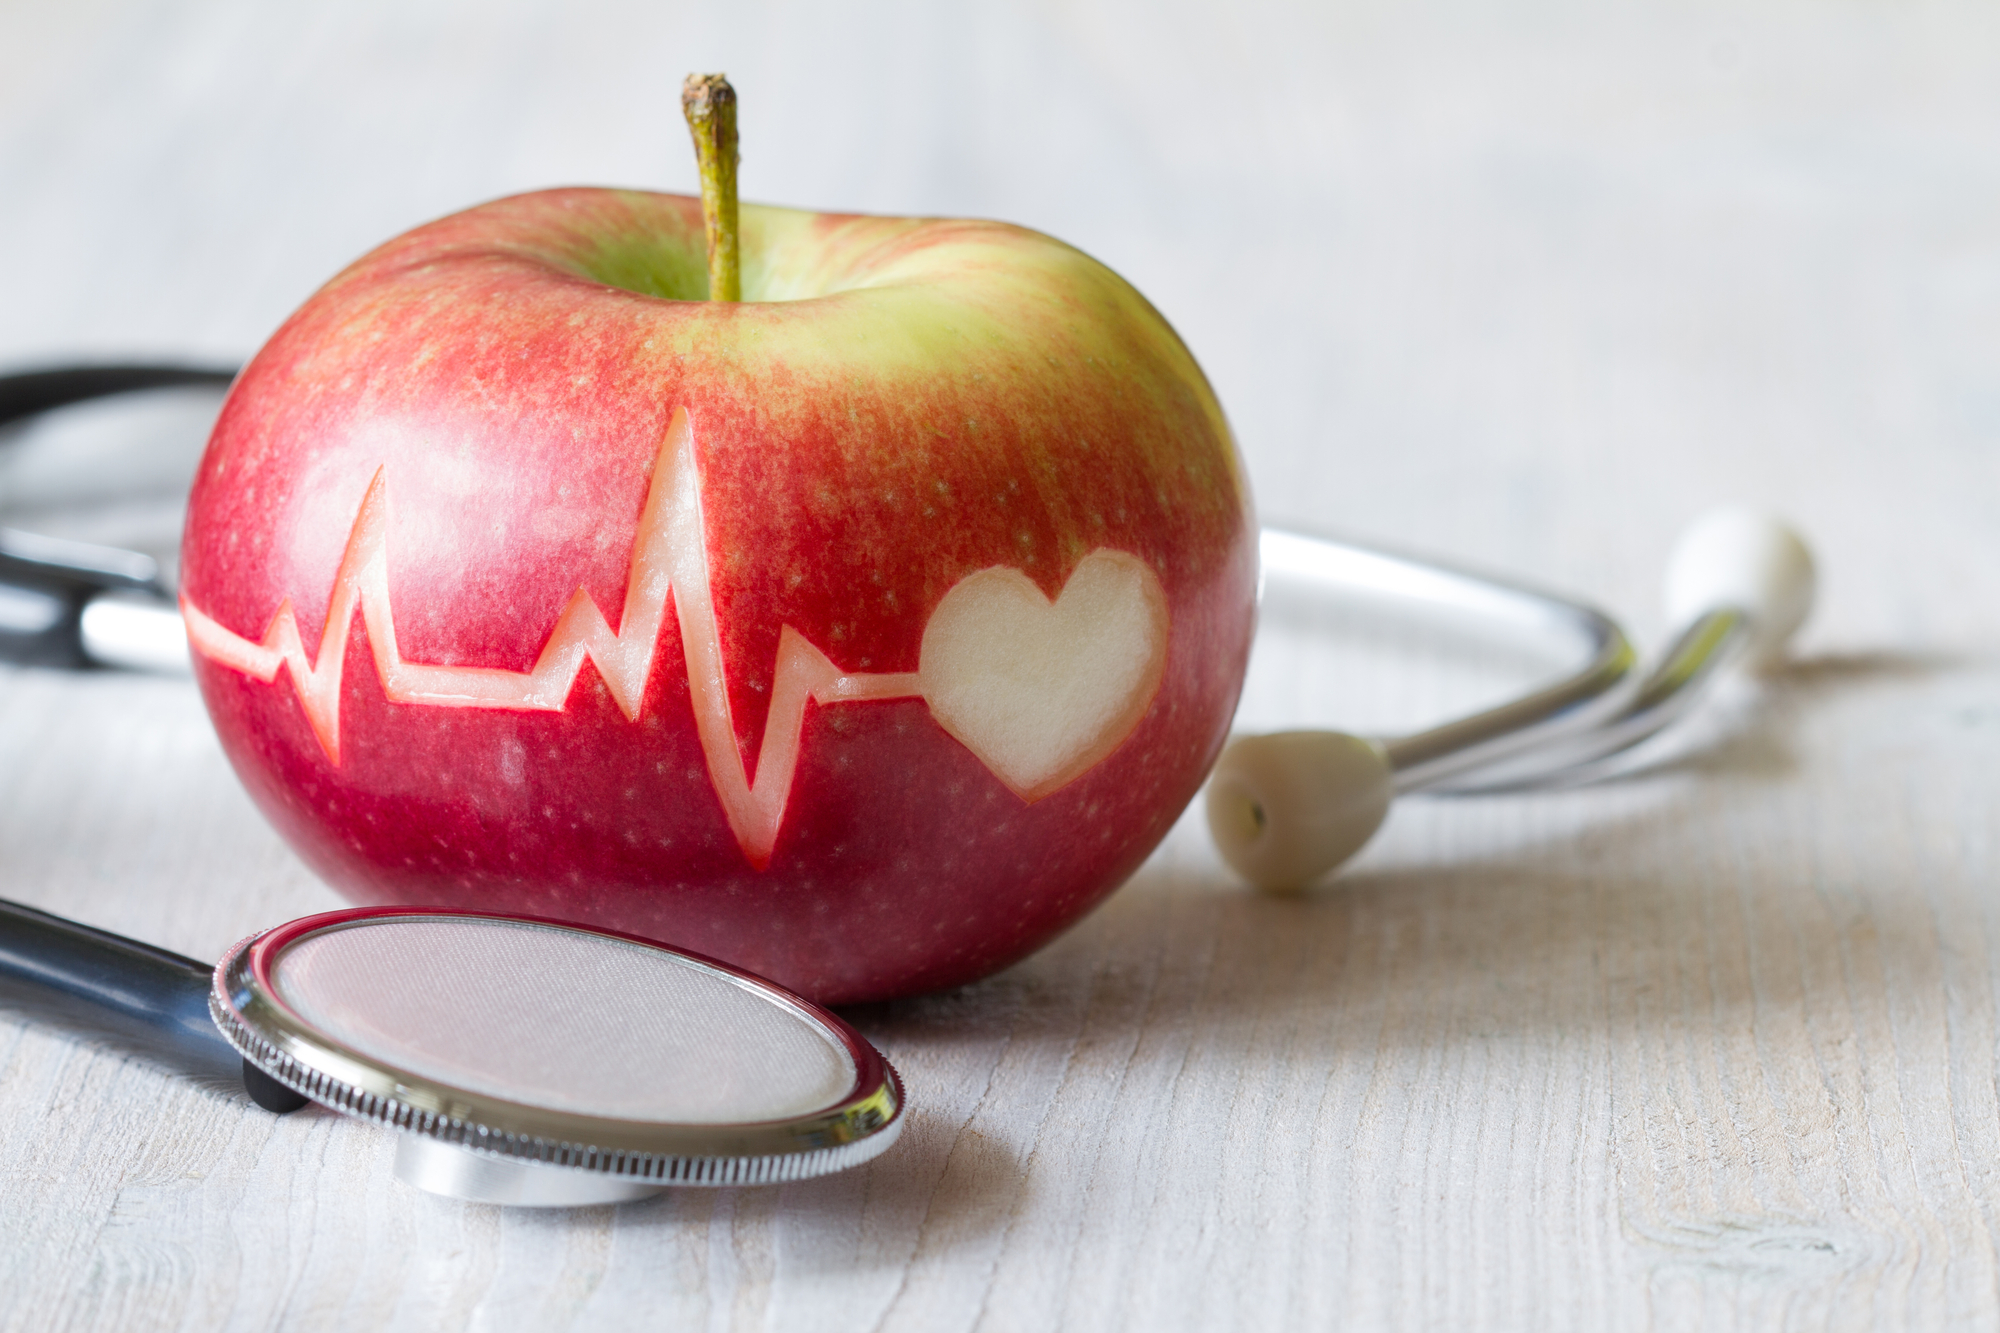 picture of apple and stethoscope on a table with ecg tracing etched in the apple